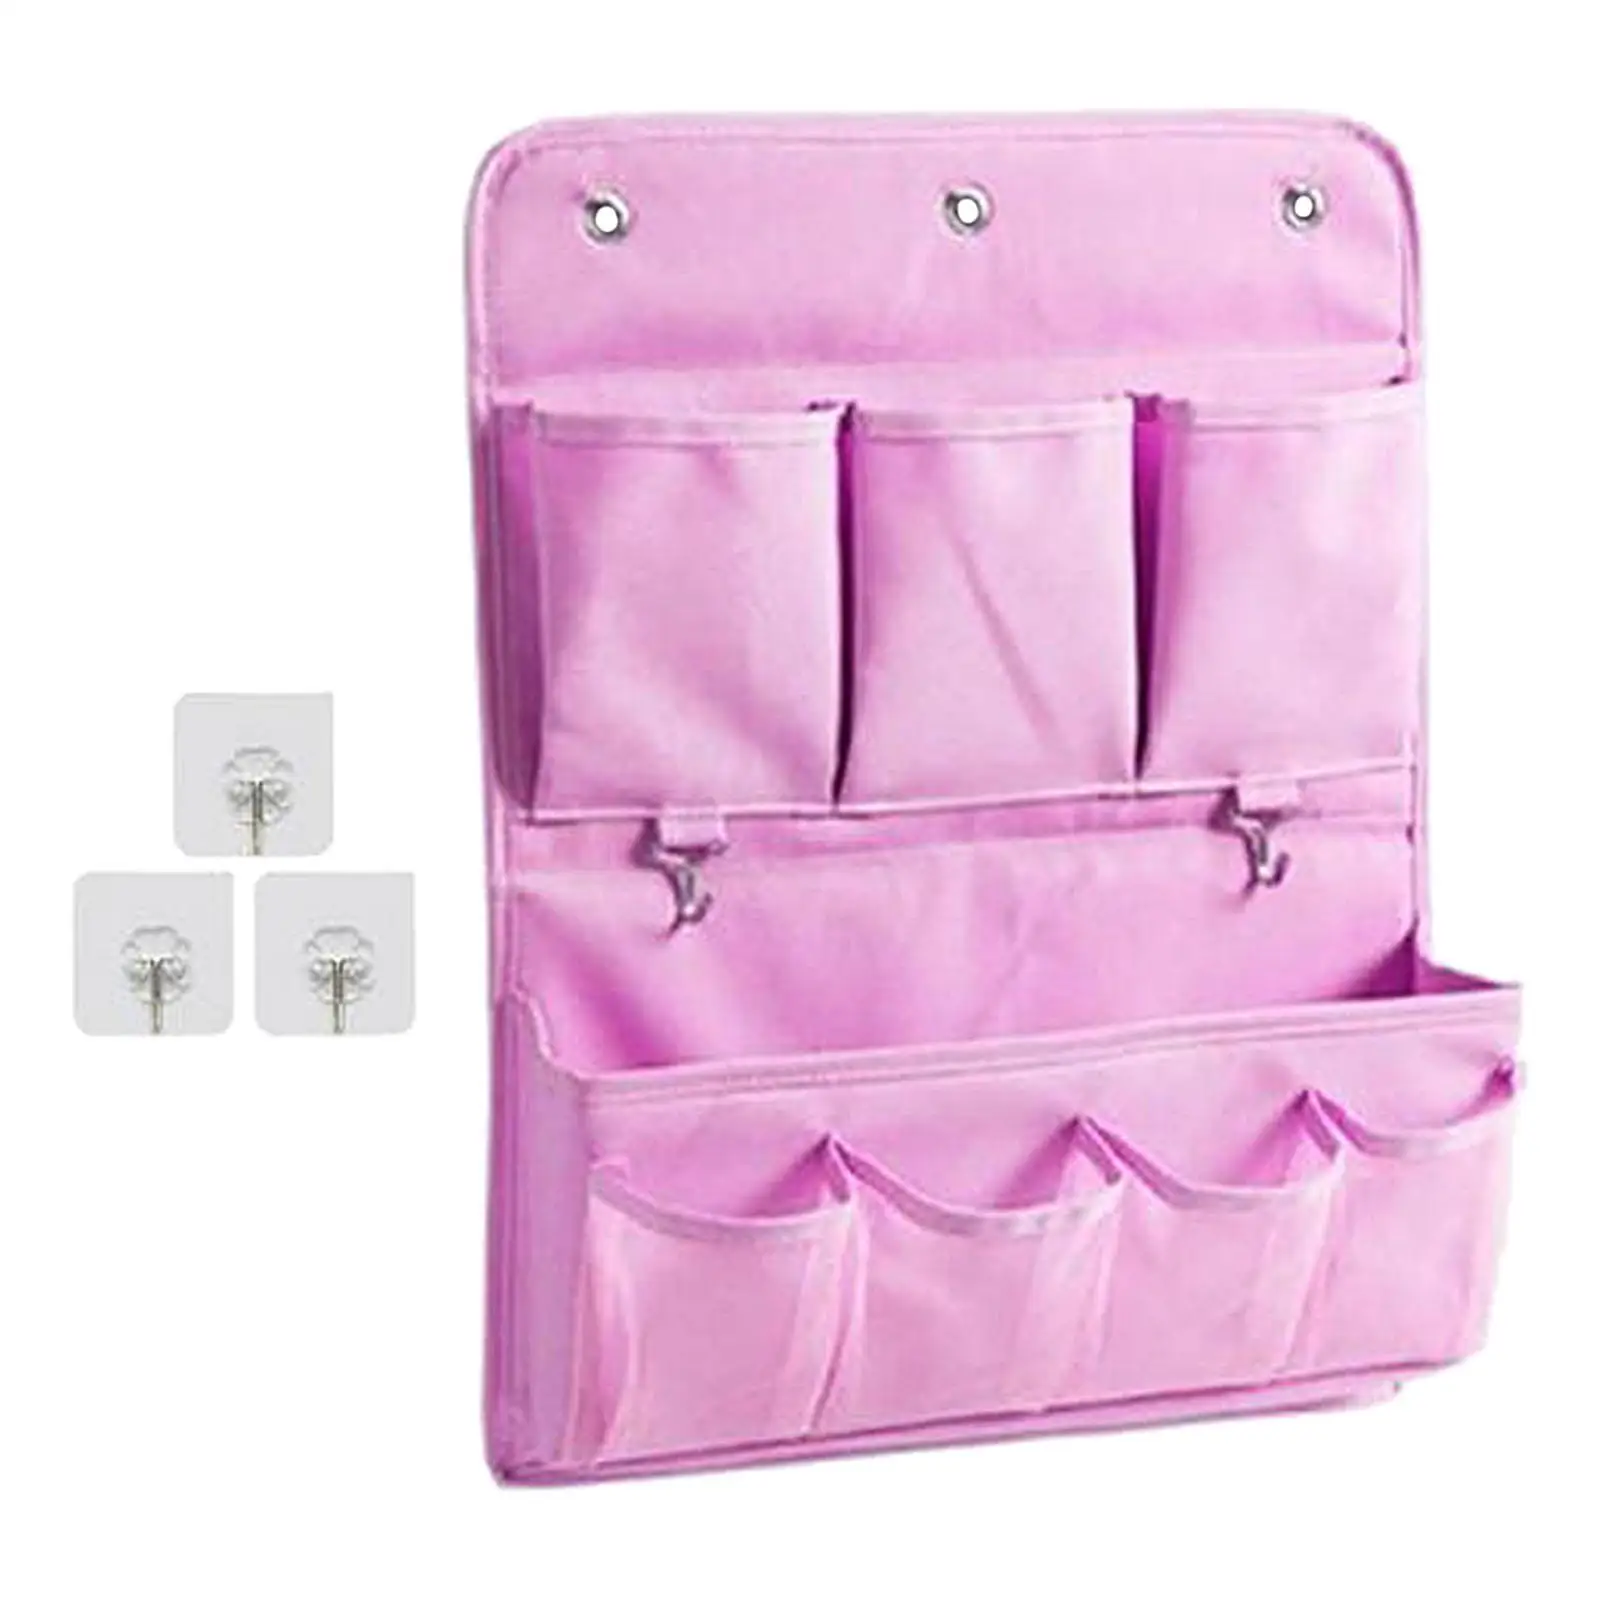 Multipurpose Storage Organizer Ornament Oxford Cloth Container for Pantry Bathroom Toiletries Living Room Dormitory